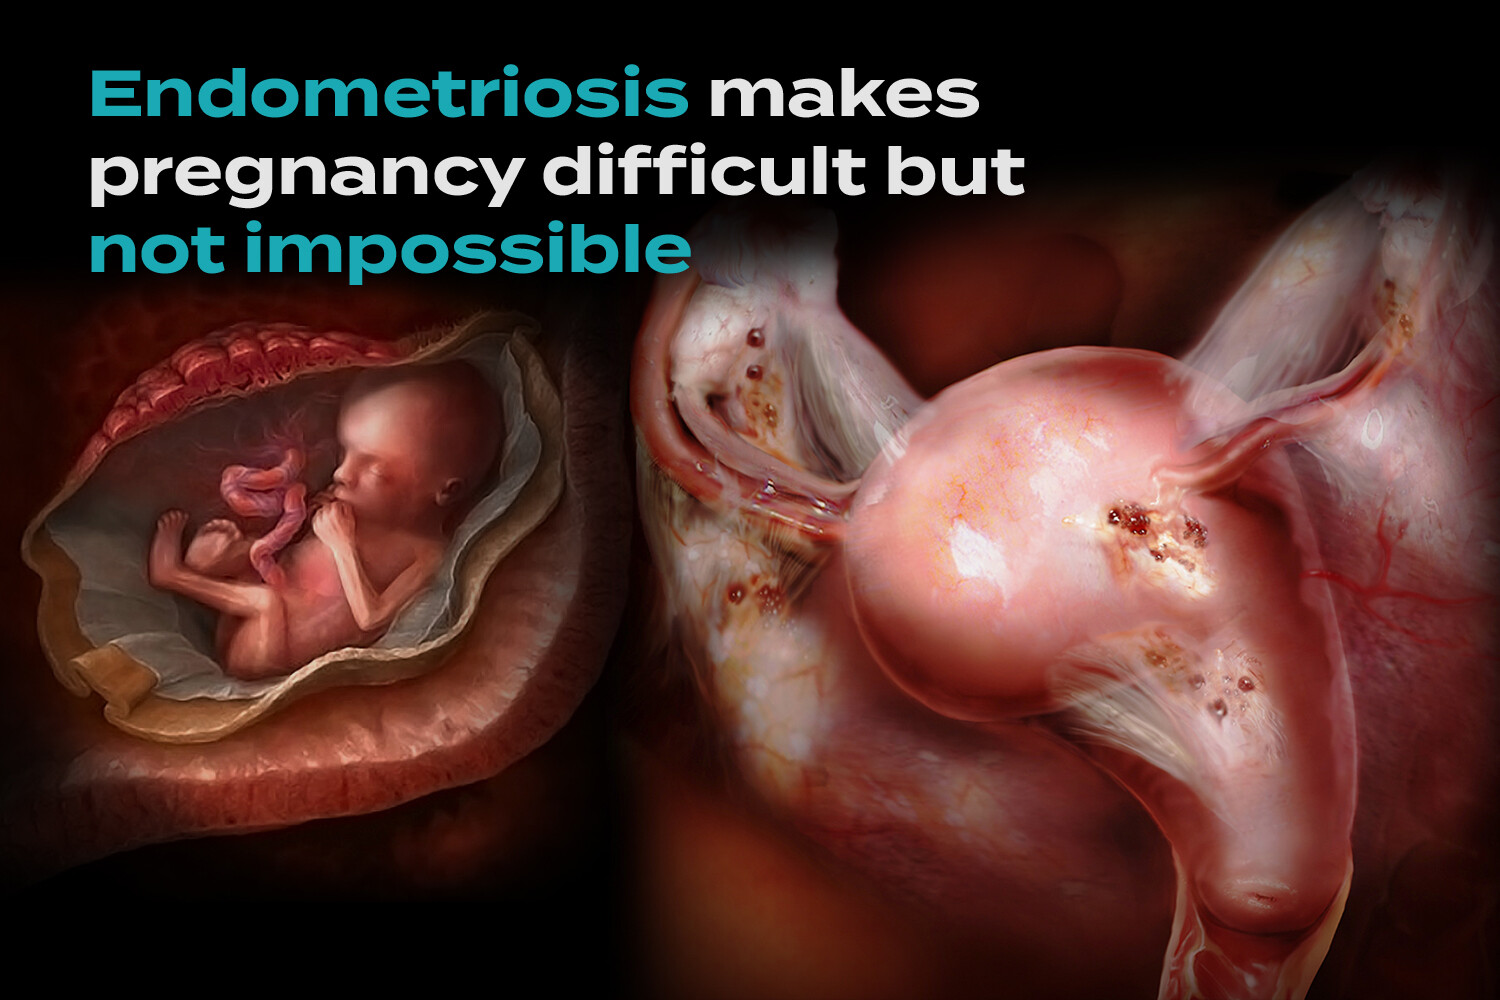 Endometriosis happens when tissue similar to the lining of the